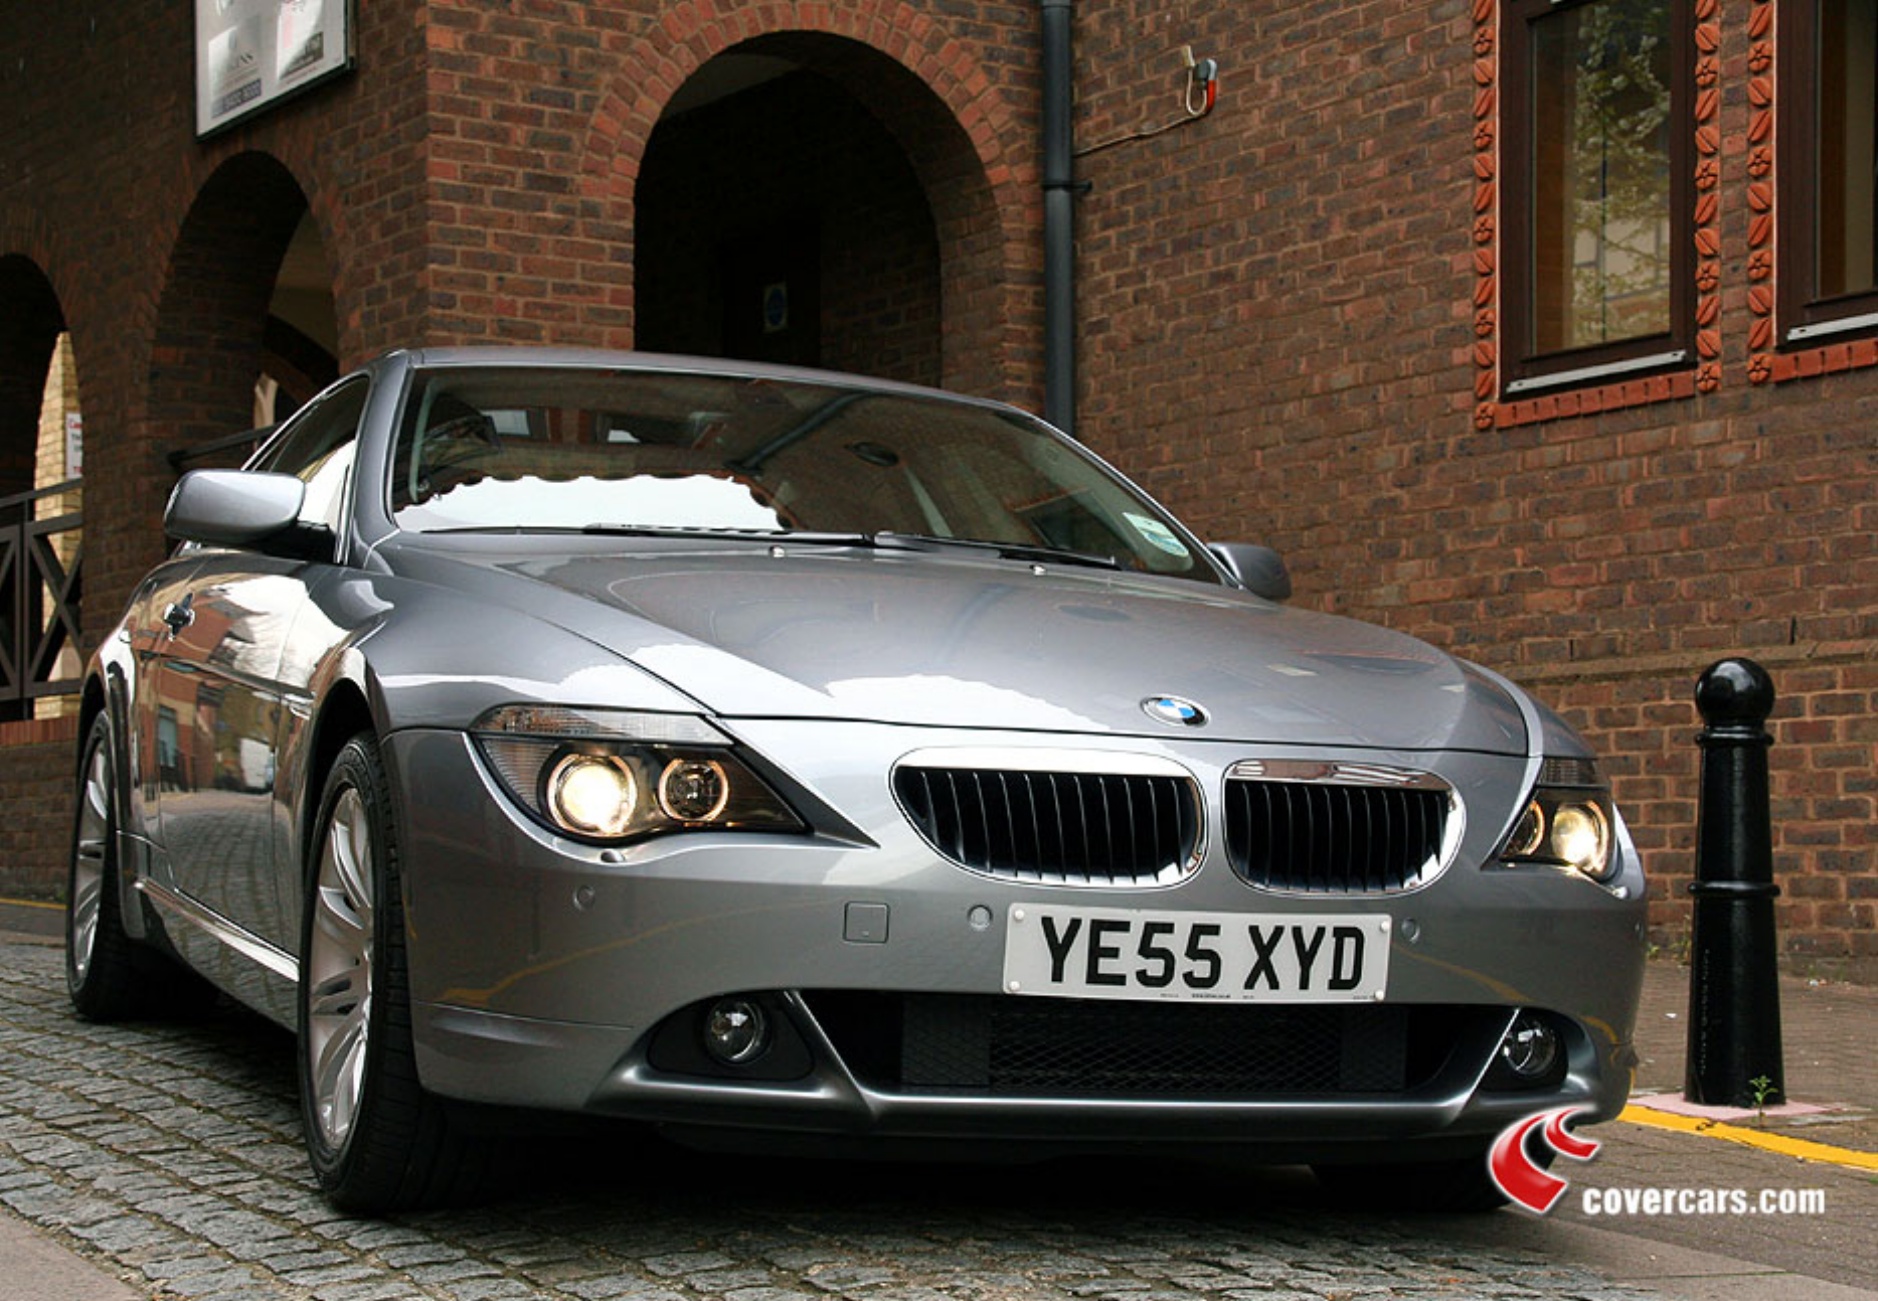 BMW 630i Coupe 2006 Picture.